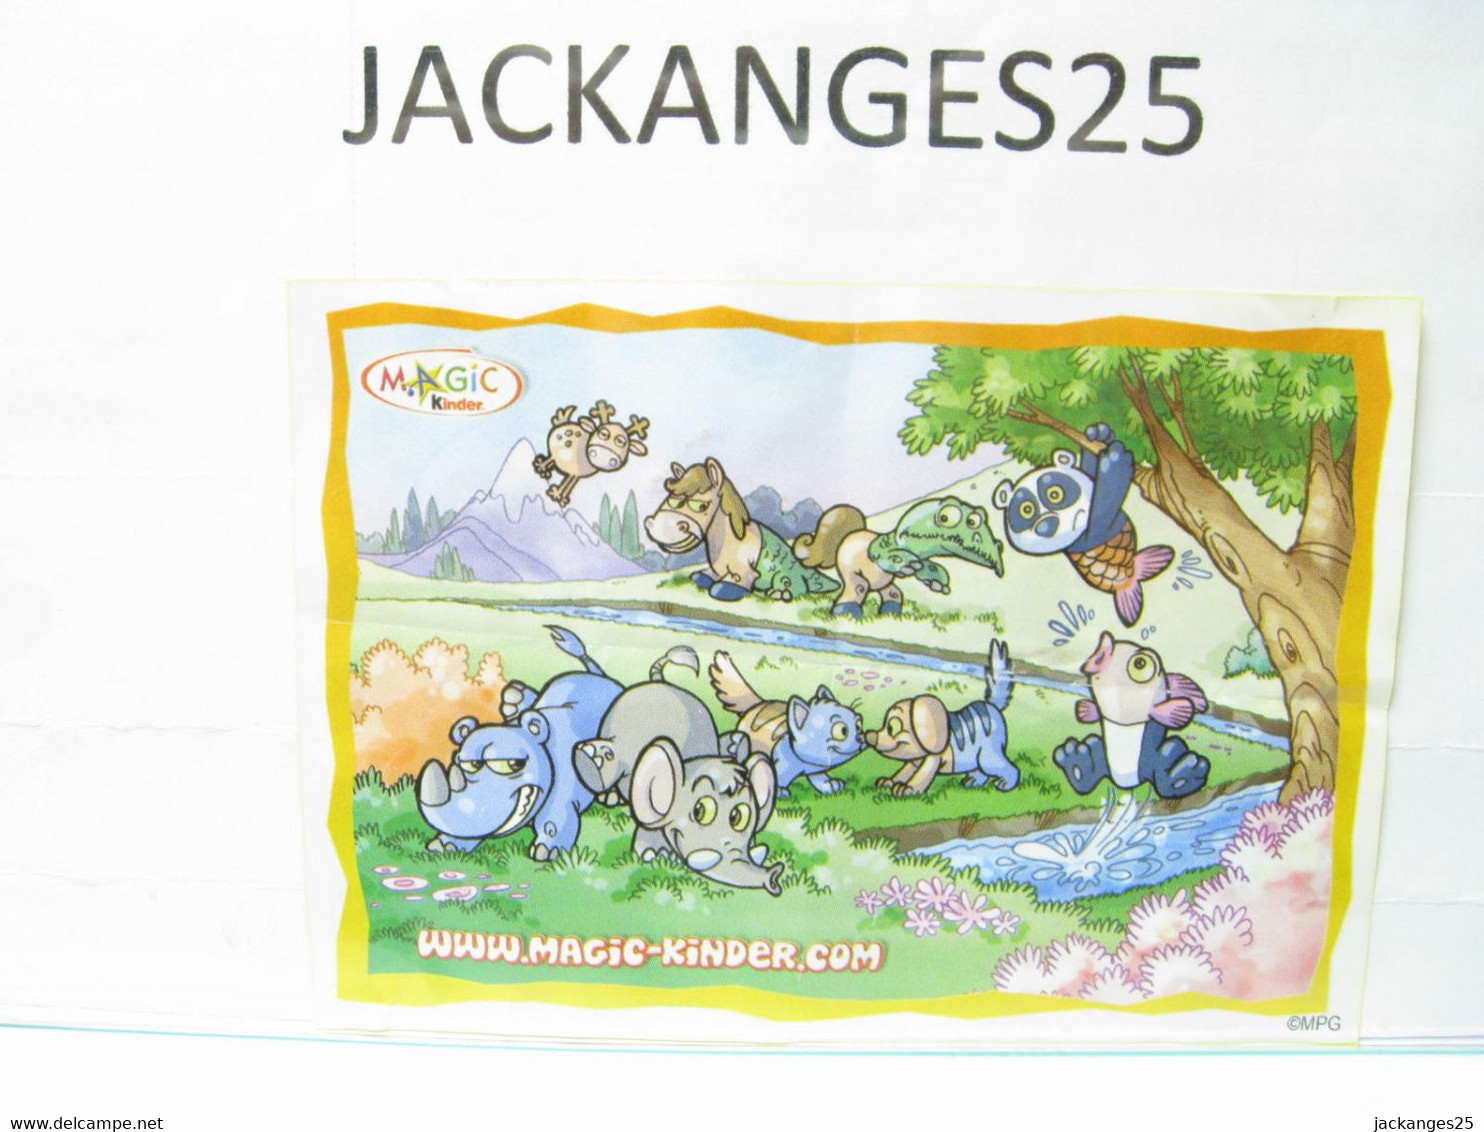 KINDER MPG NV 44 A RHINOCEROS ANIMAUX NATURE NATOONS TIERE 2008 + BPZ A - Families